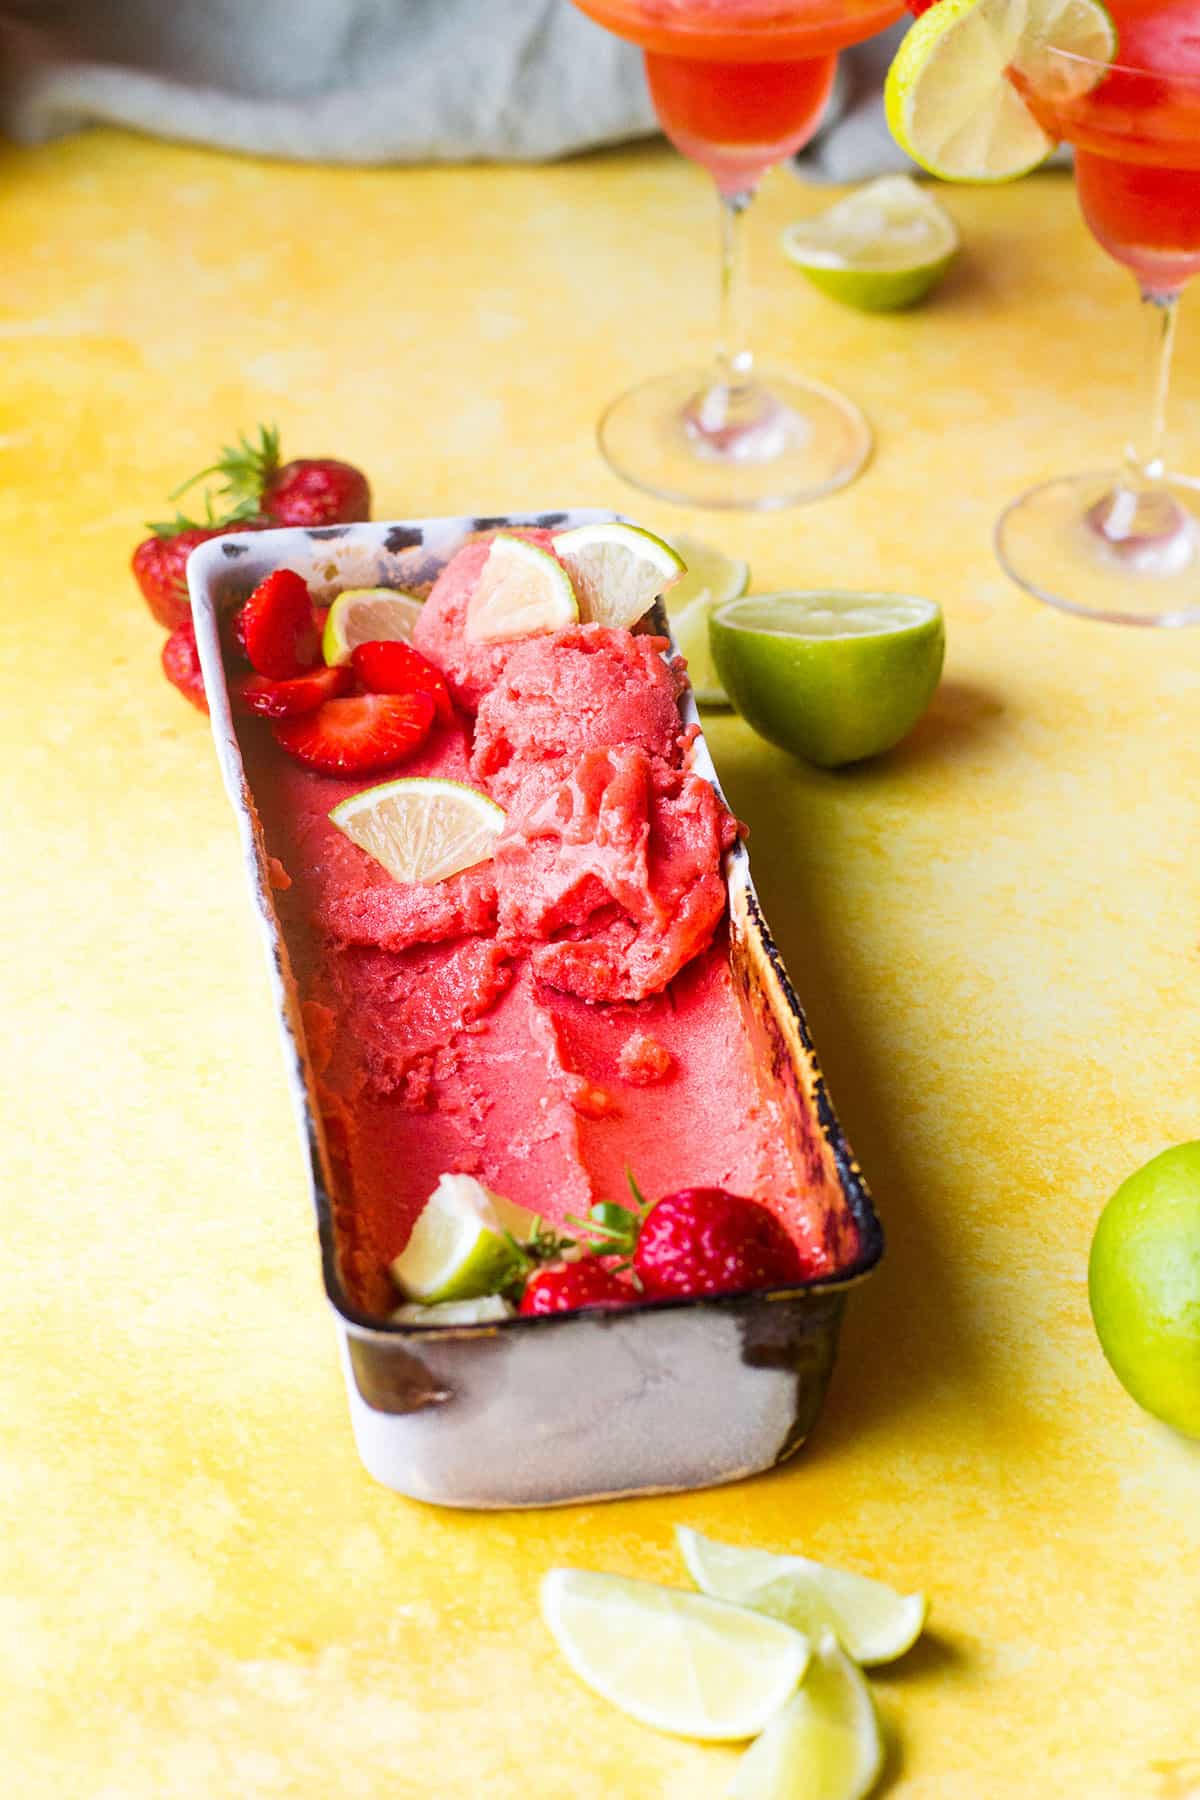 Bread pan with strawberry sorbet and lime slices.